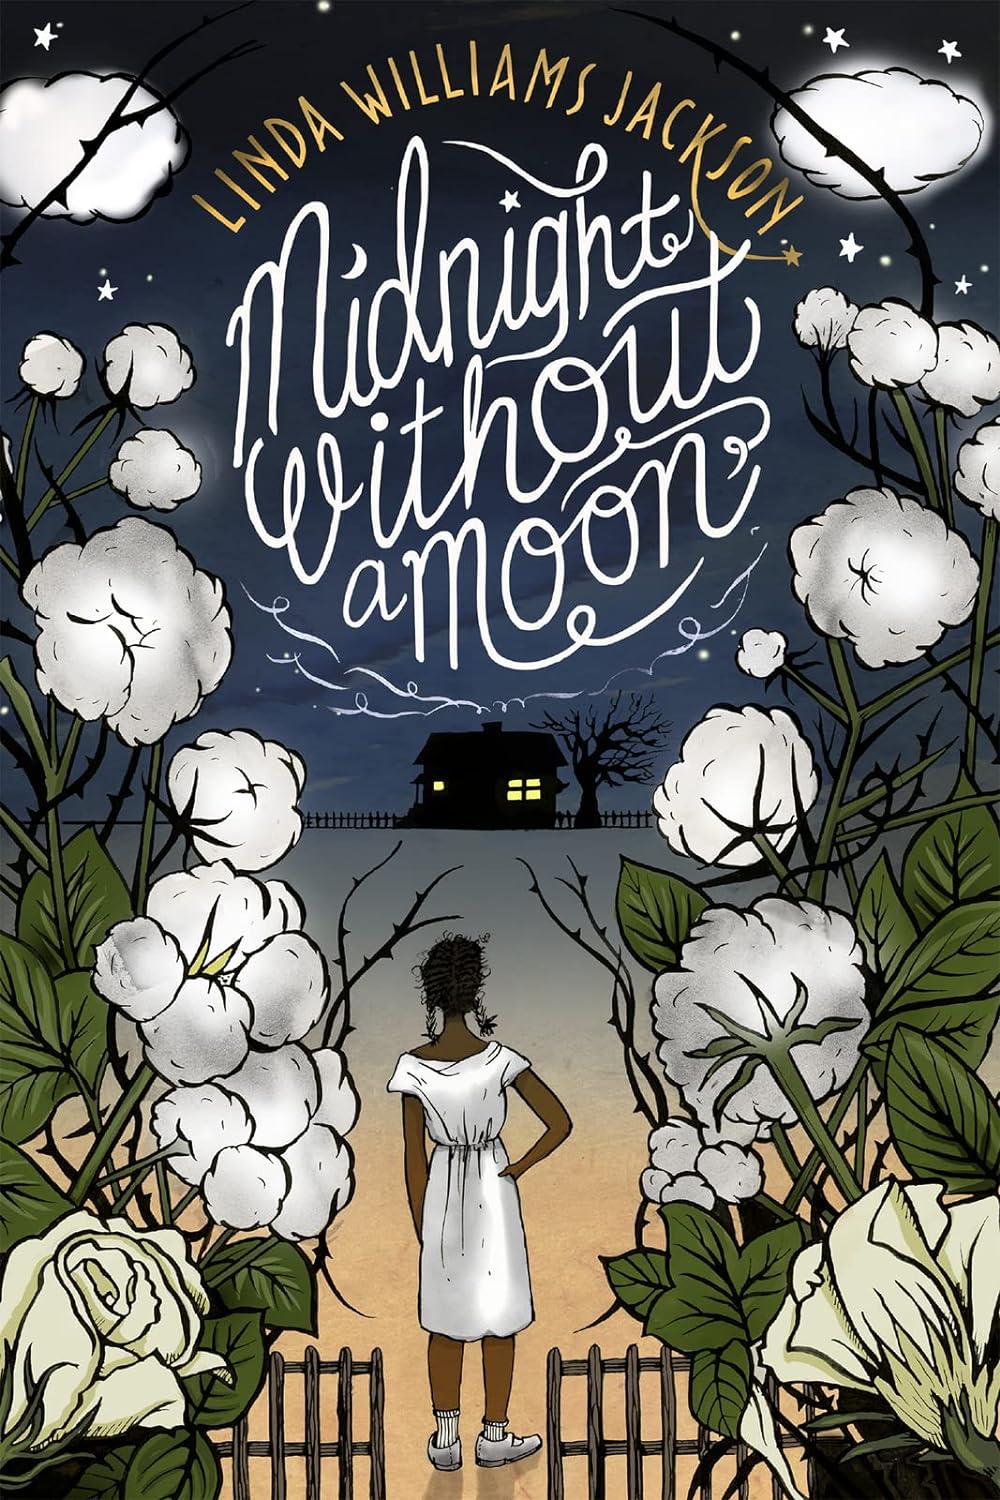 Linda Williams Jackson: Midnight without a moon (2017)